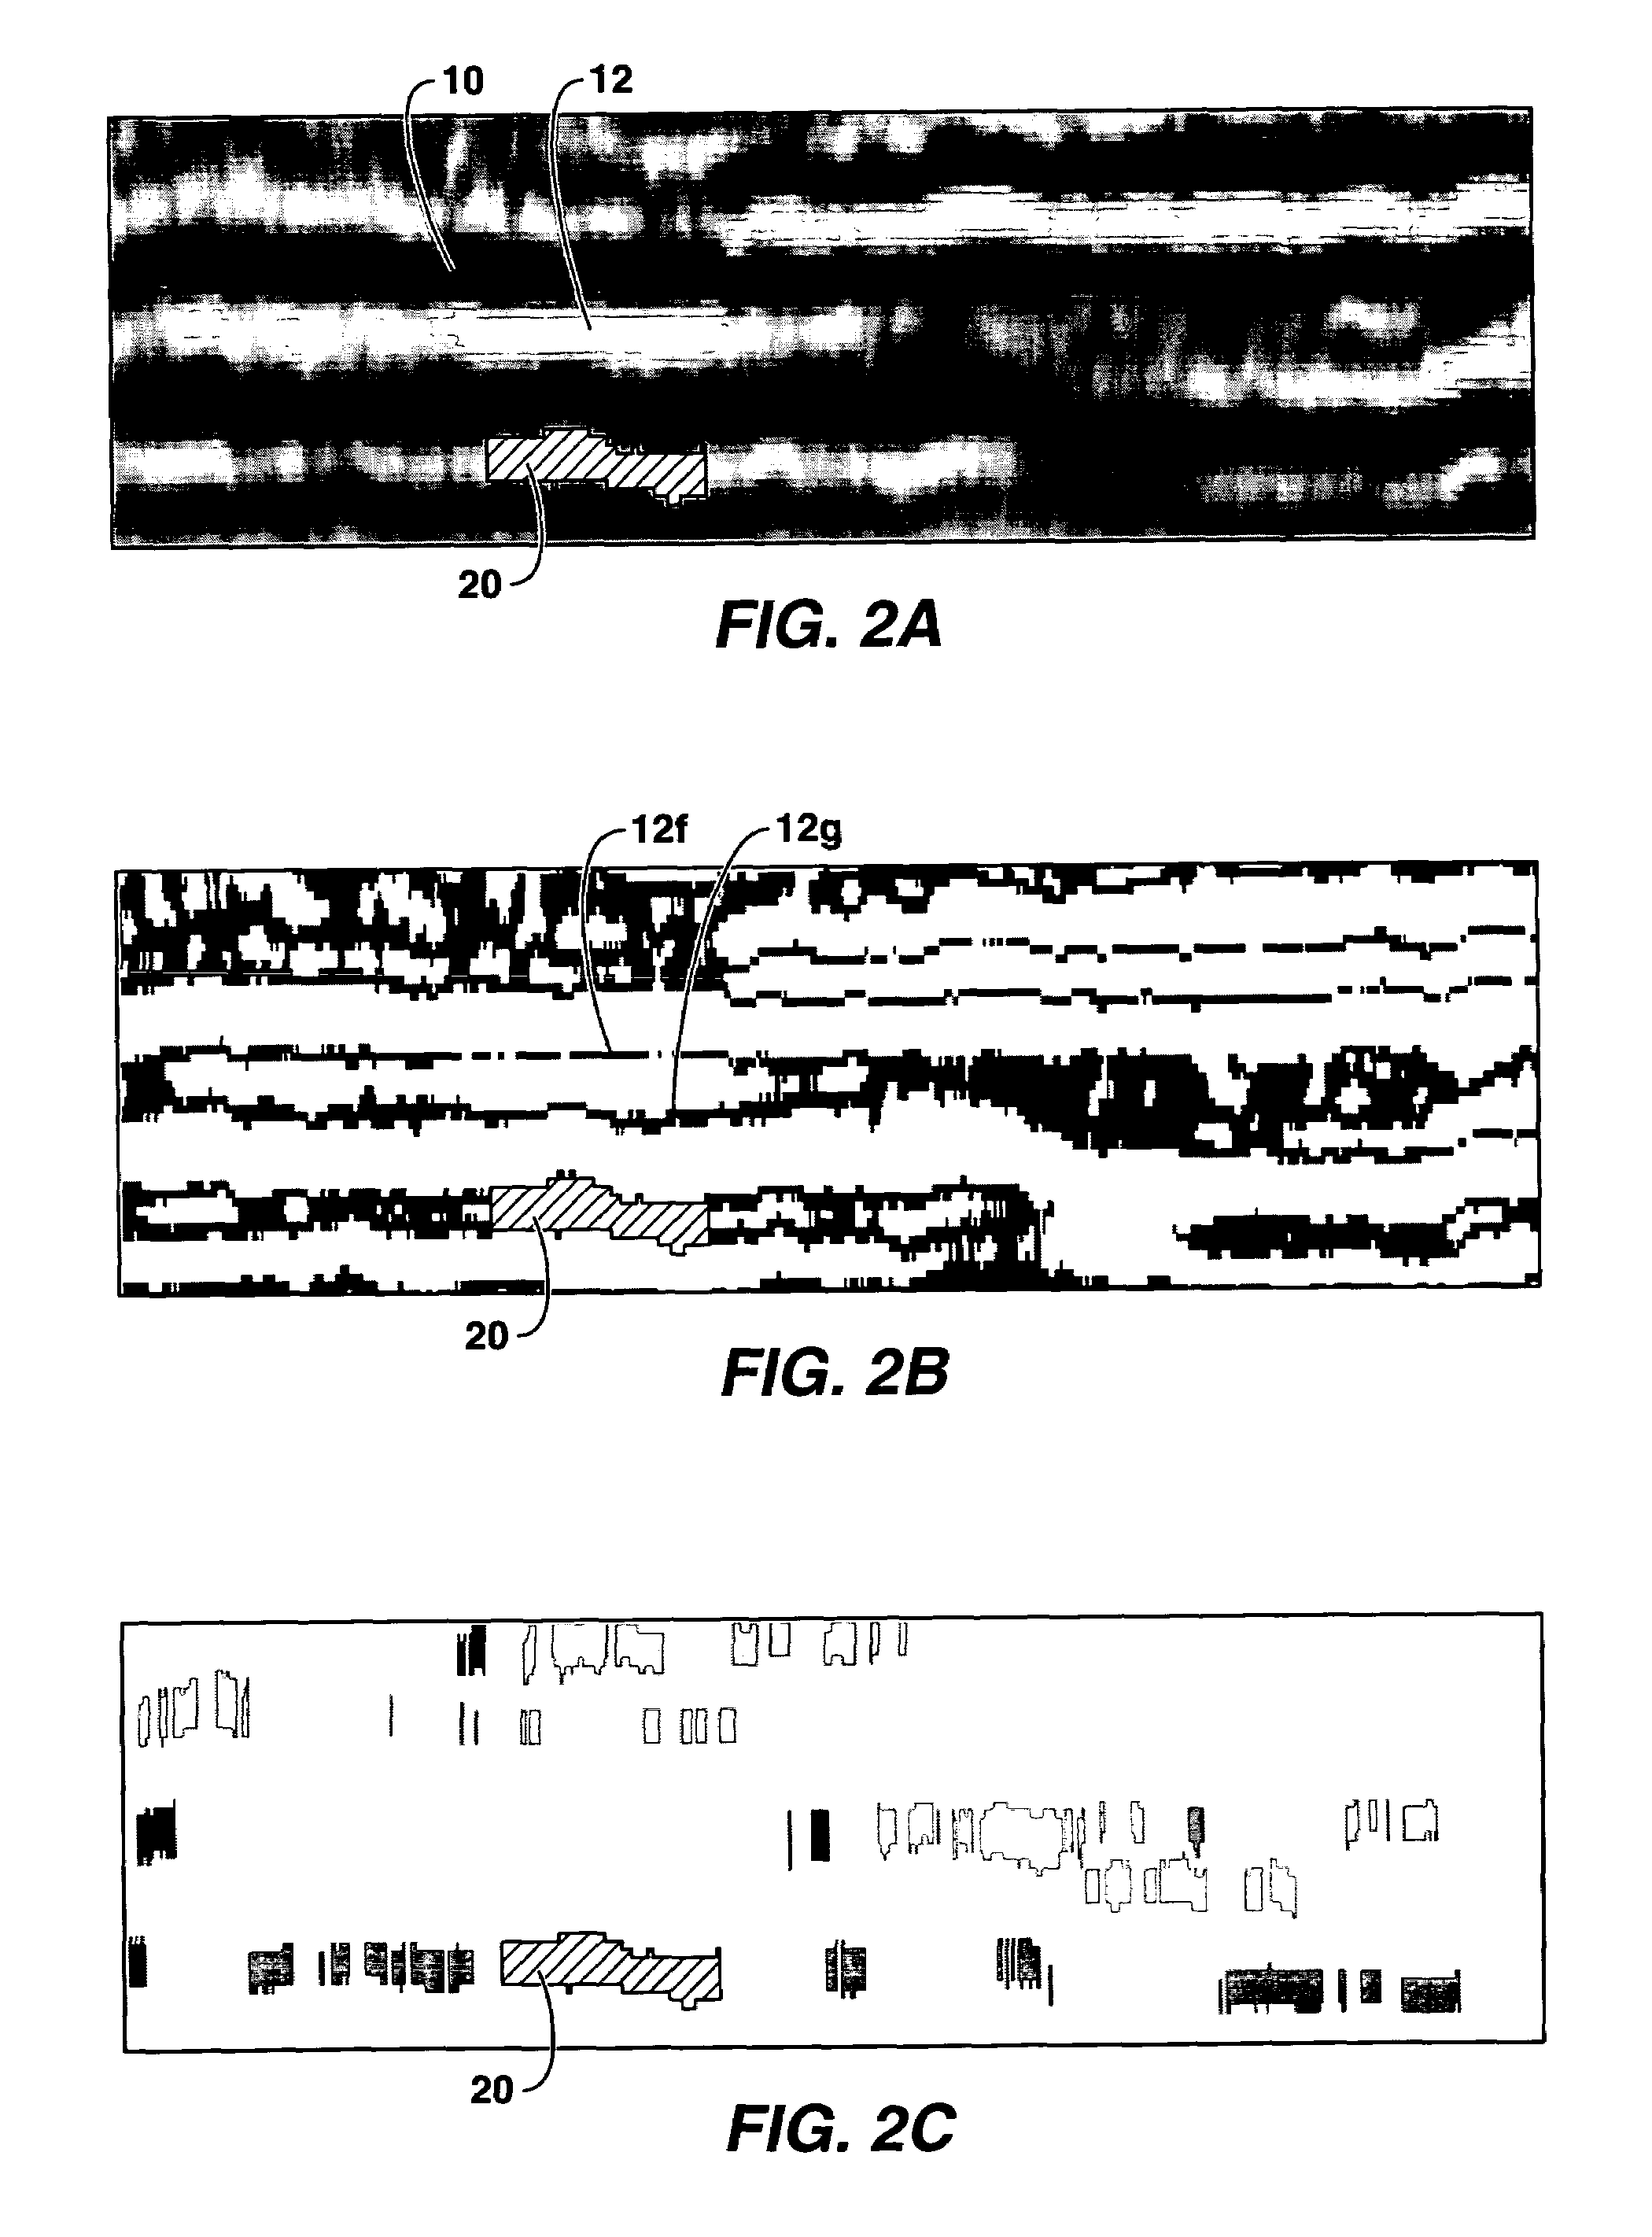 Method for performing stratigraphically-based seed detection in a 3-D seismic data volume